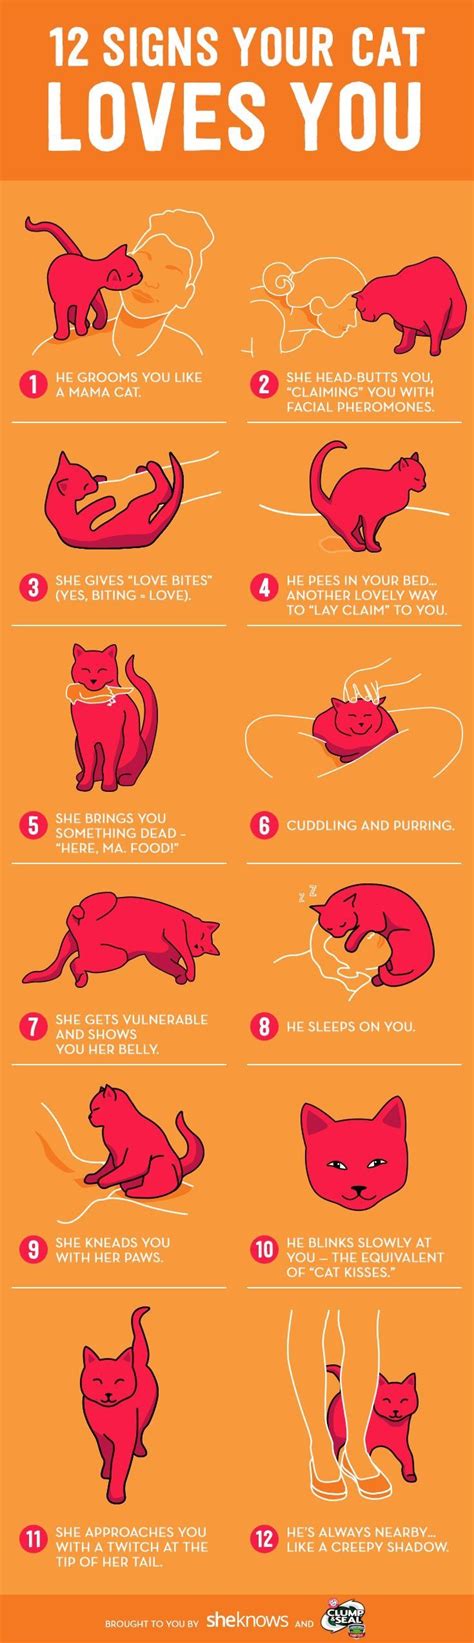 Pin By Adele Conticello On Cats Cat Behavior Cat Love Kittens